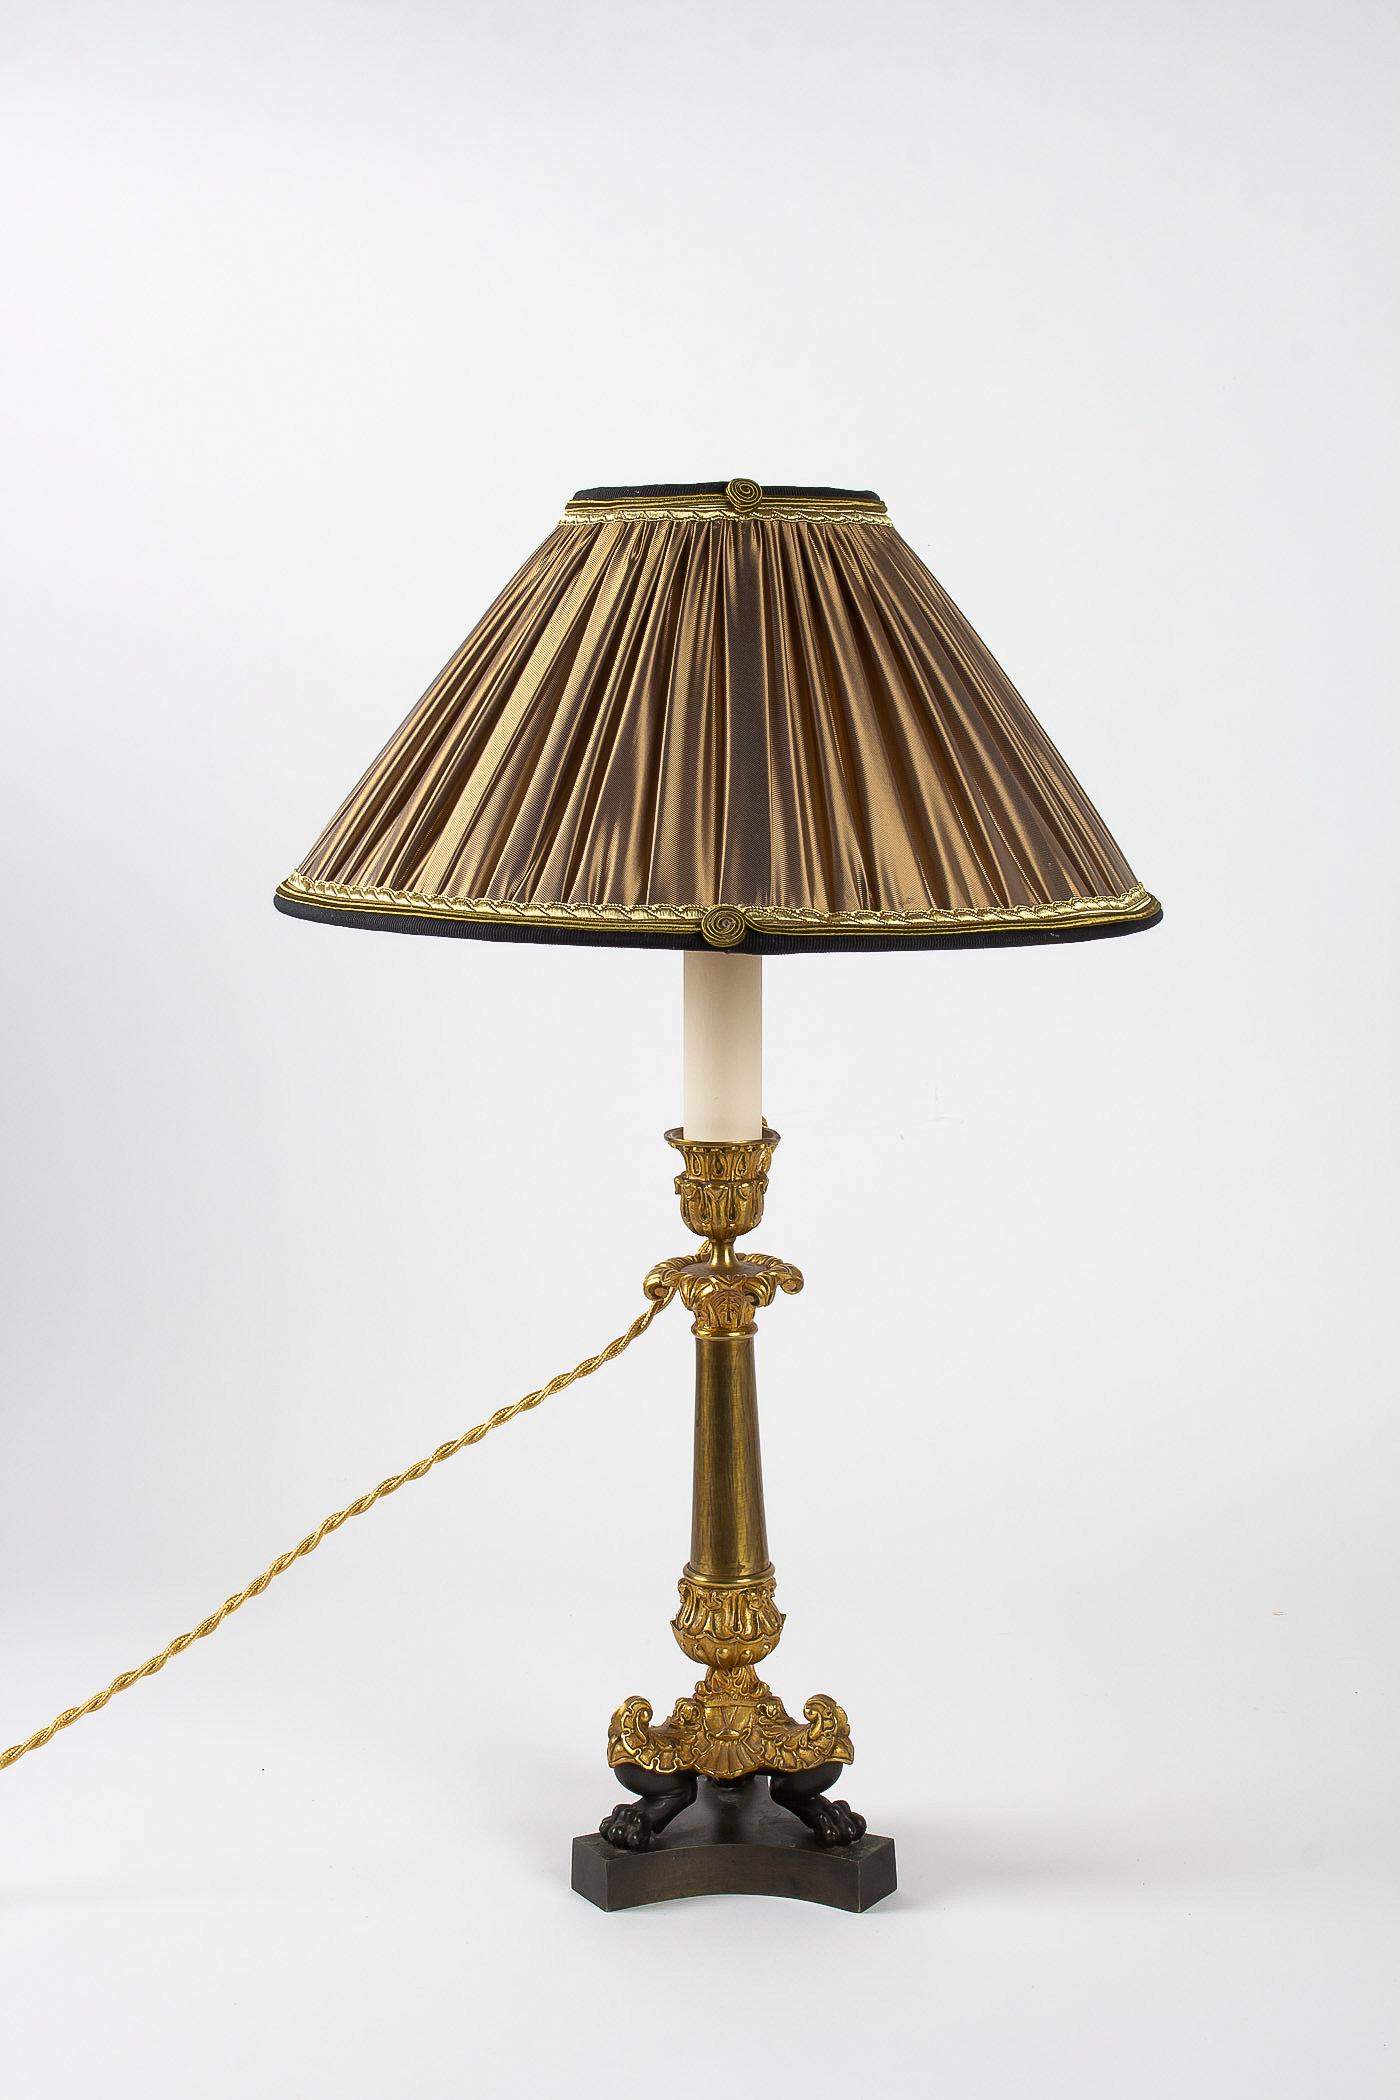 Restoration Period, Converted in Table Lamps, Pair of Small Bronze Candlesticks (Restauration)